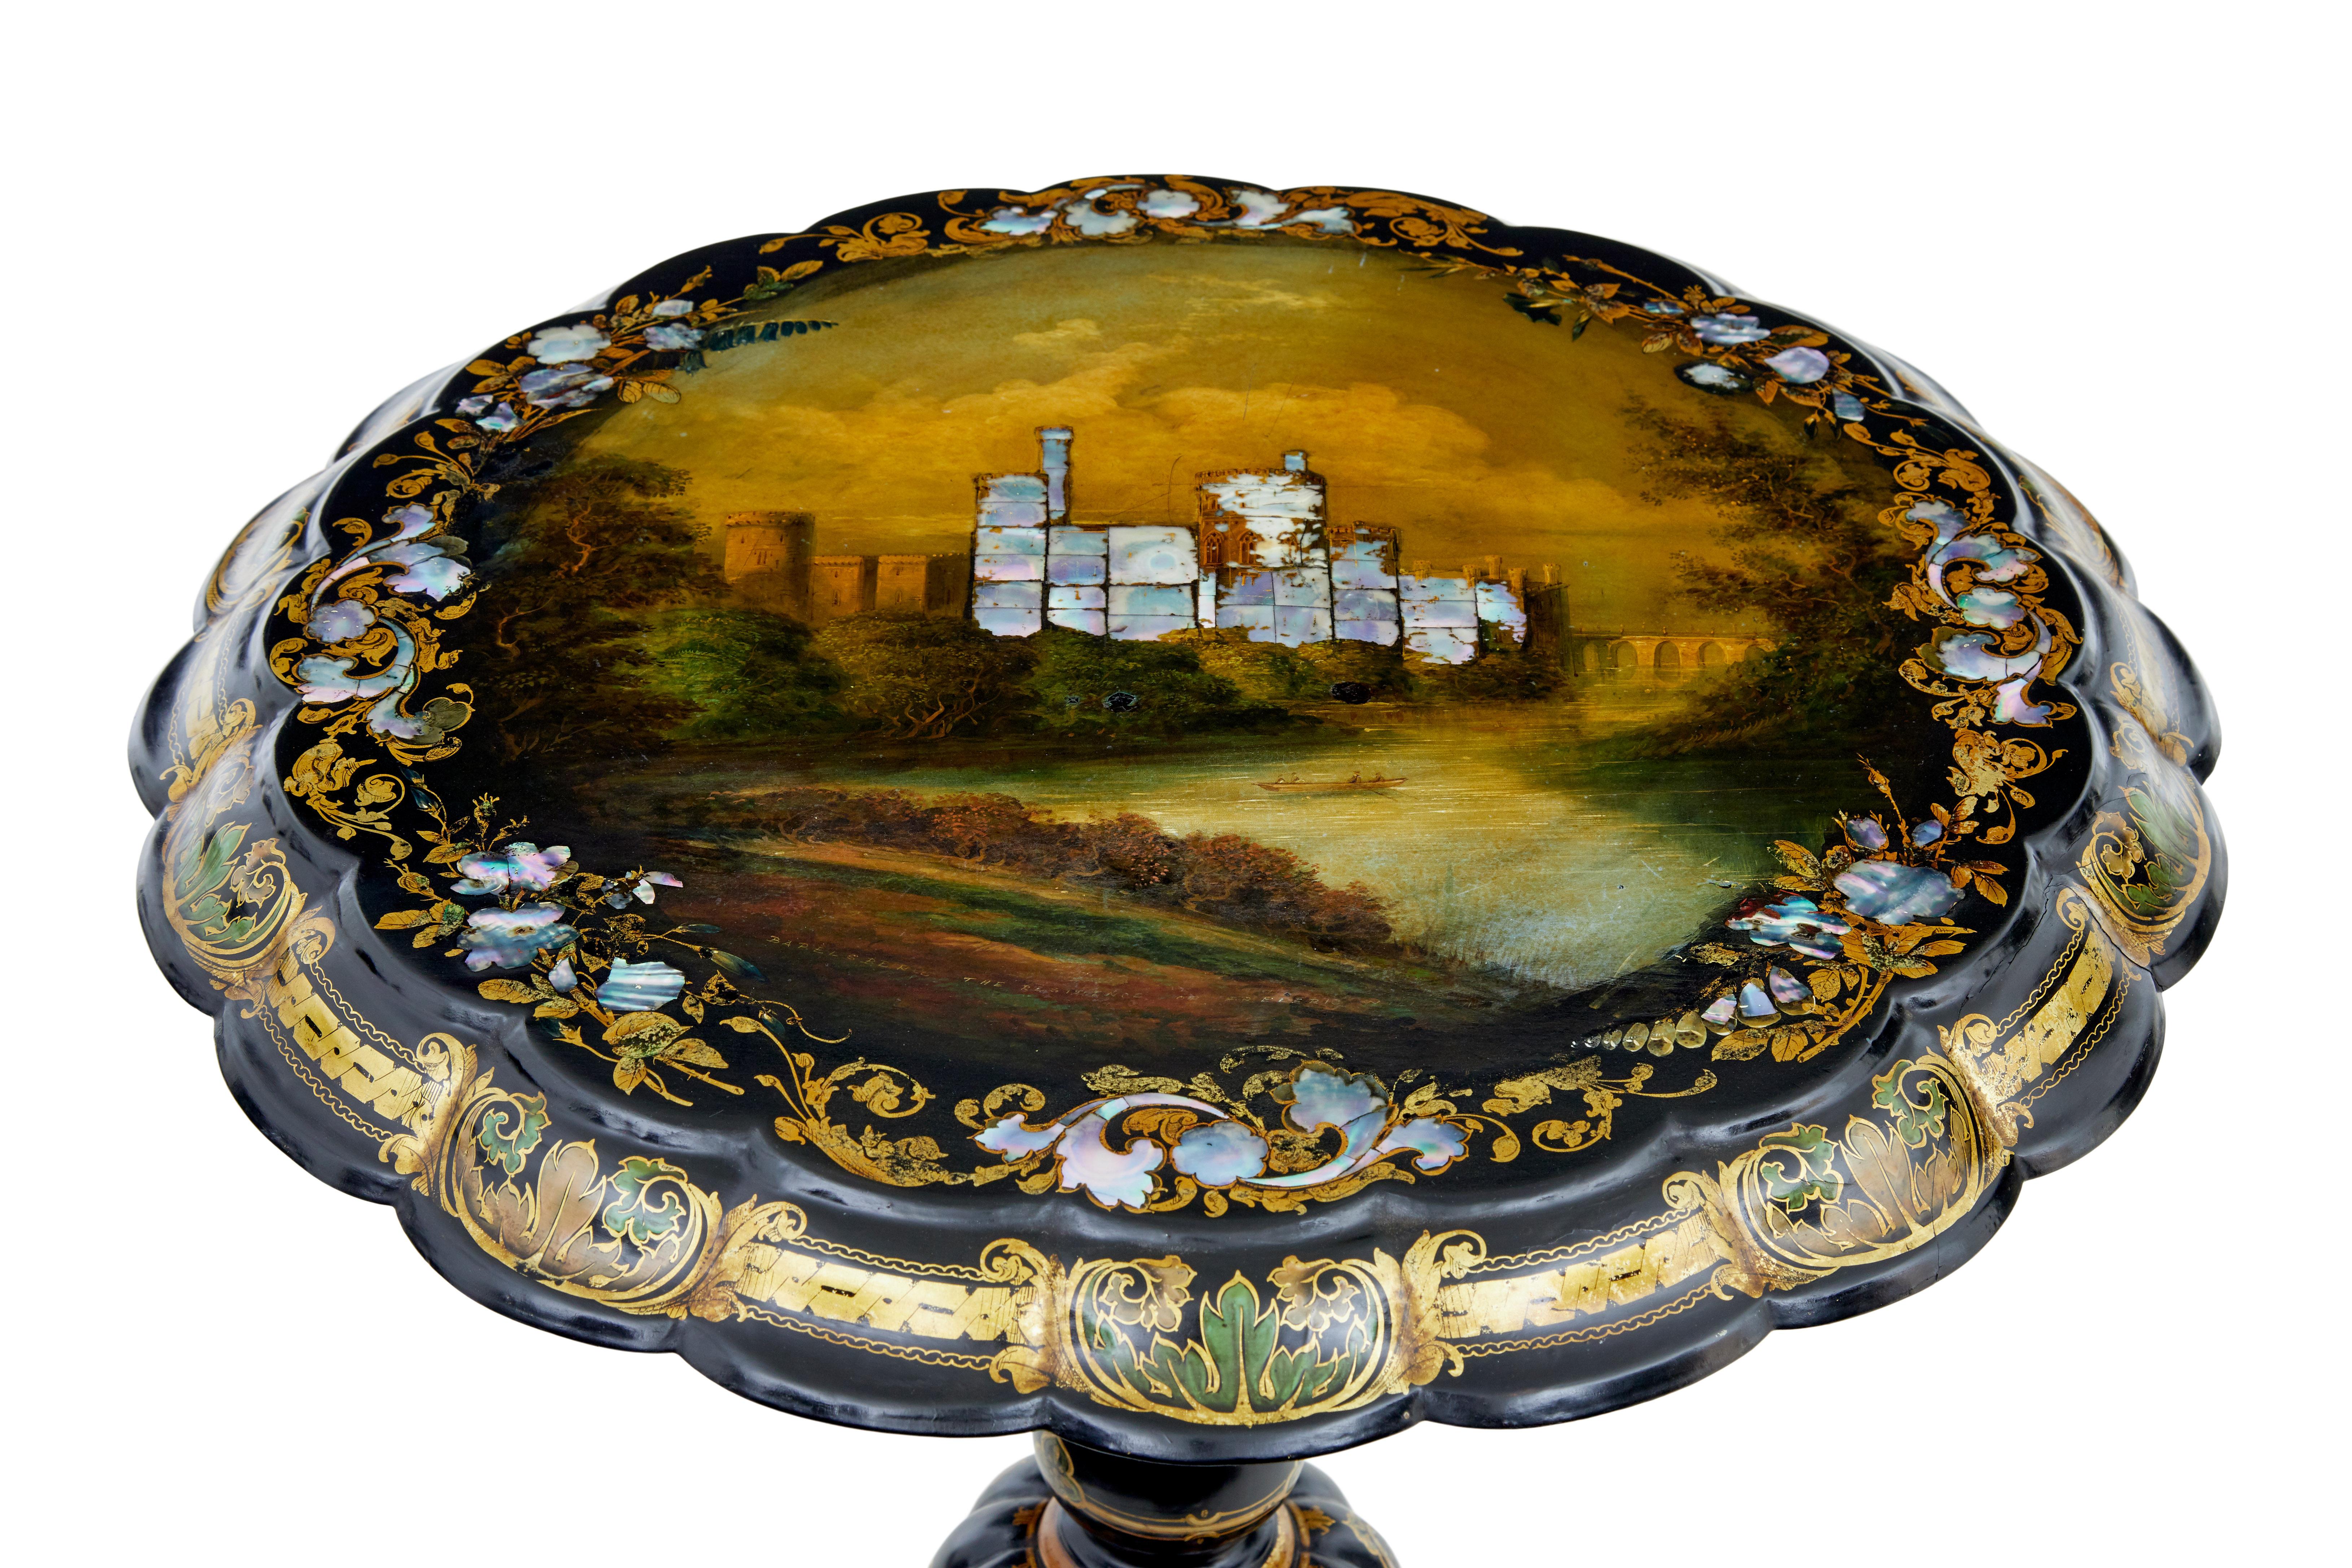 Superb quality table very much in the manner of Jennings and Bettridge

Features a scene and is inscribed 'babelsberg the residence of frederic willian'

Babelsberg palace is the largest district of the bradenburg capital potsdam in germany, which